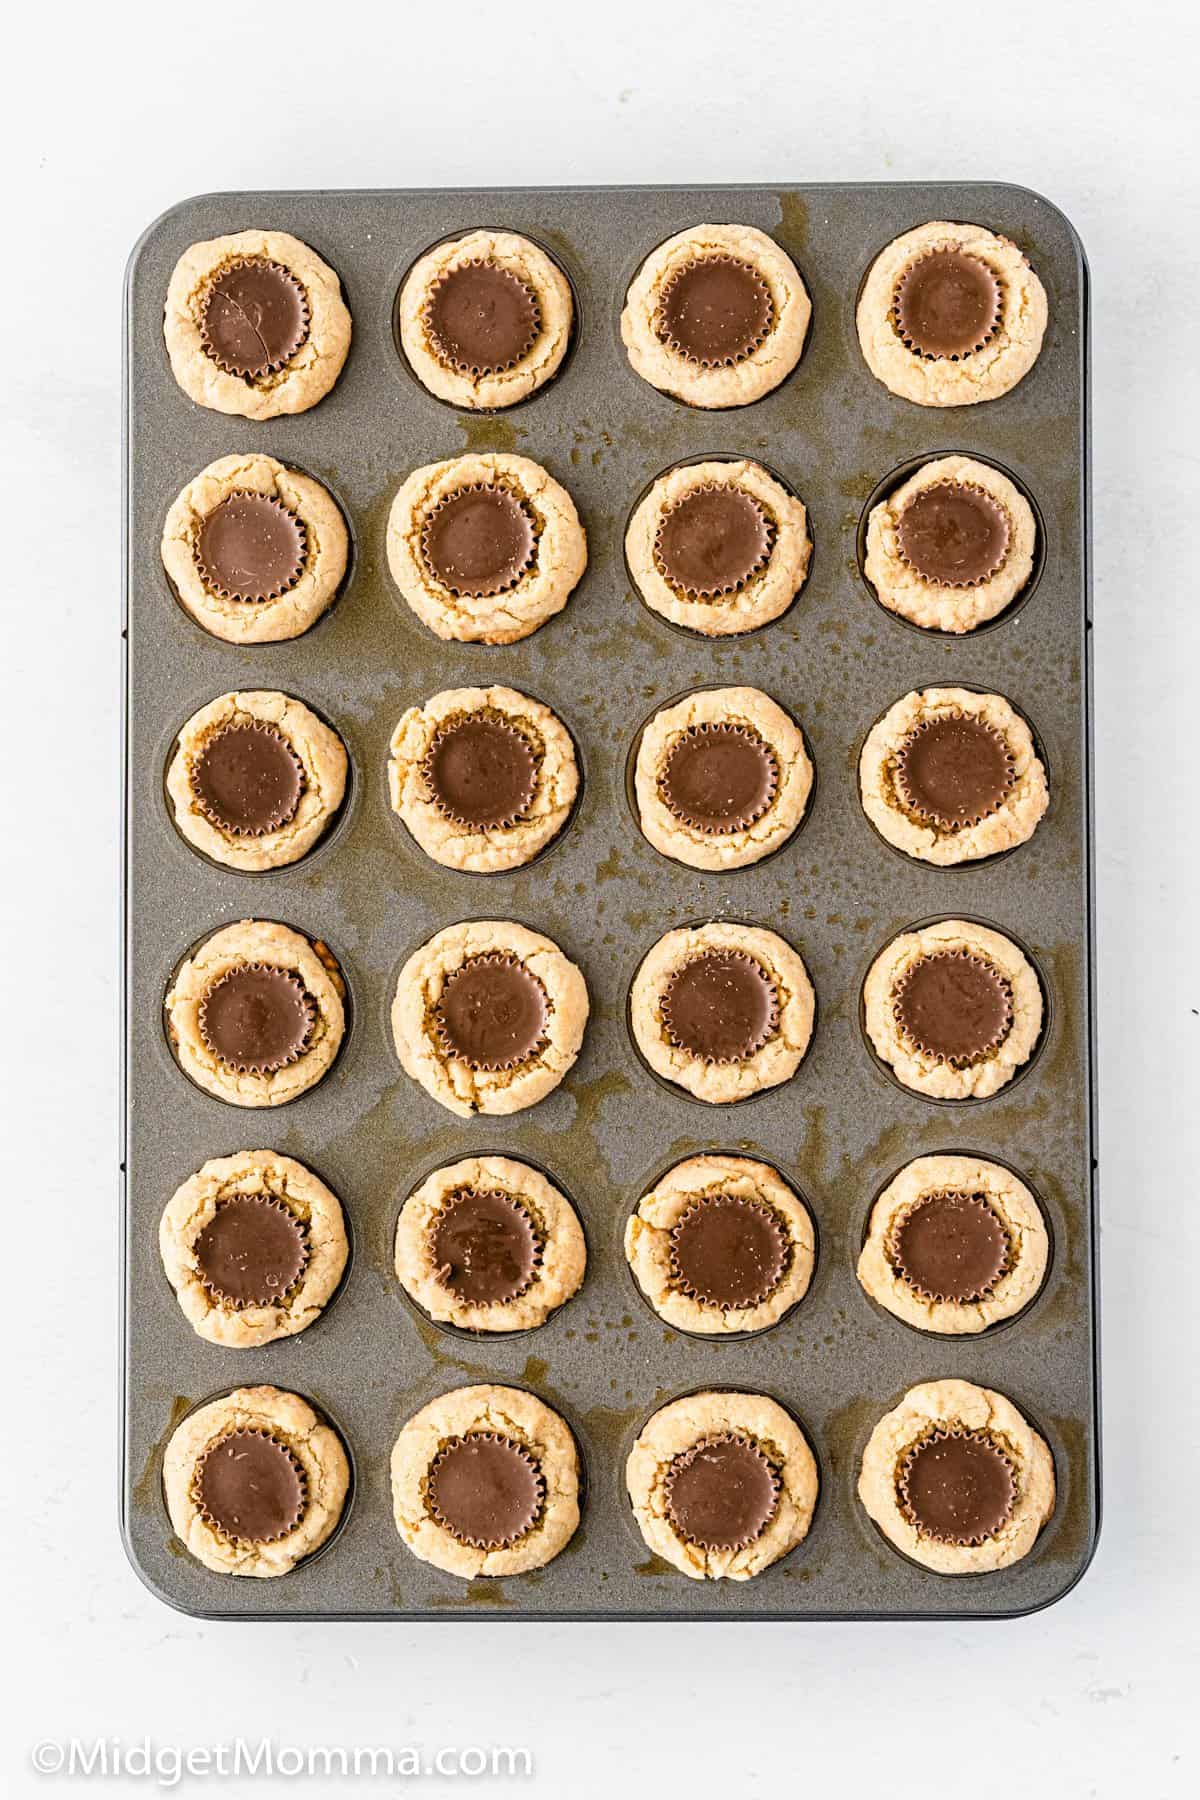 Muffin Tin Peanut Butter Cup Cookies - Muffin Tin Recipes